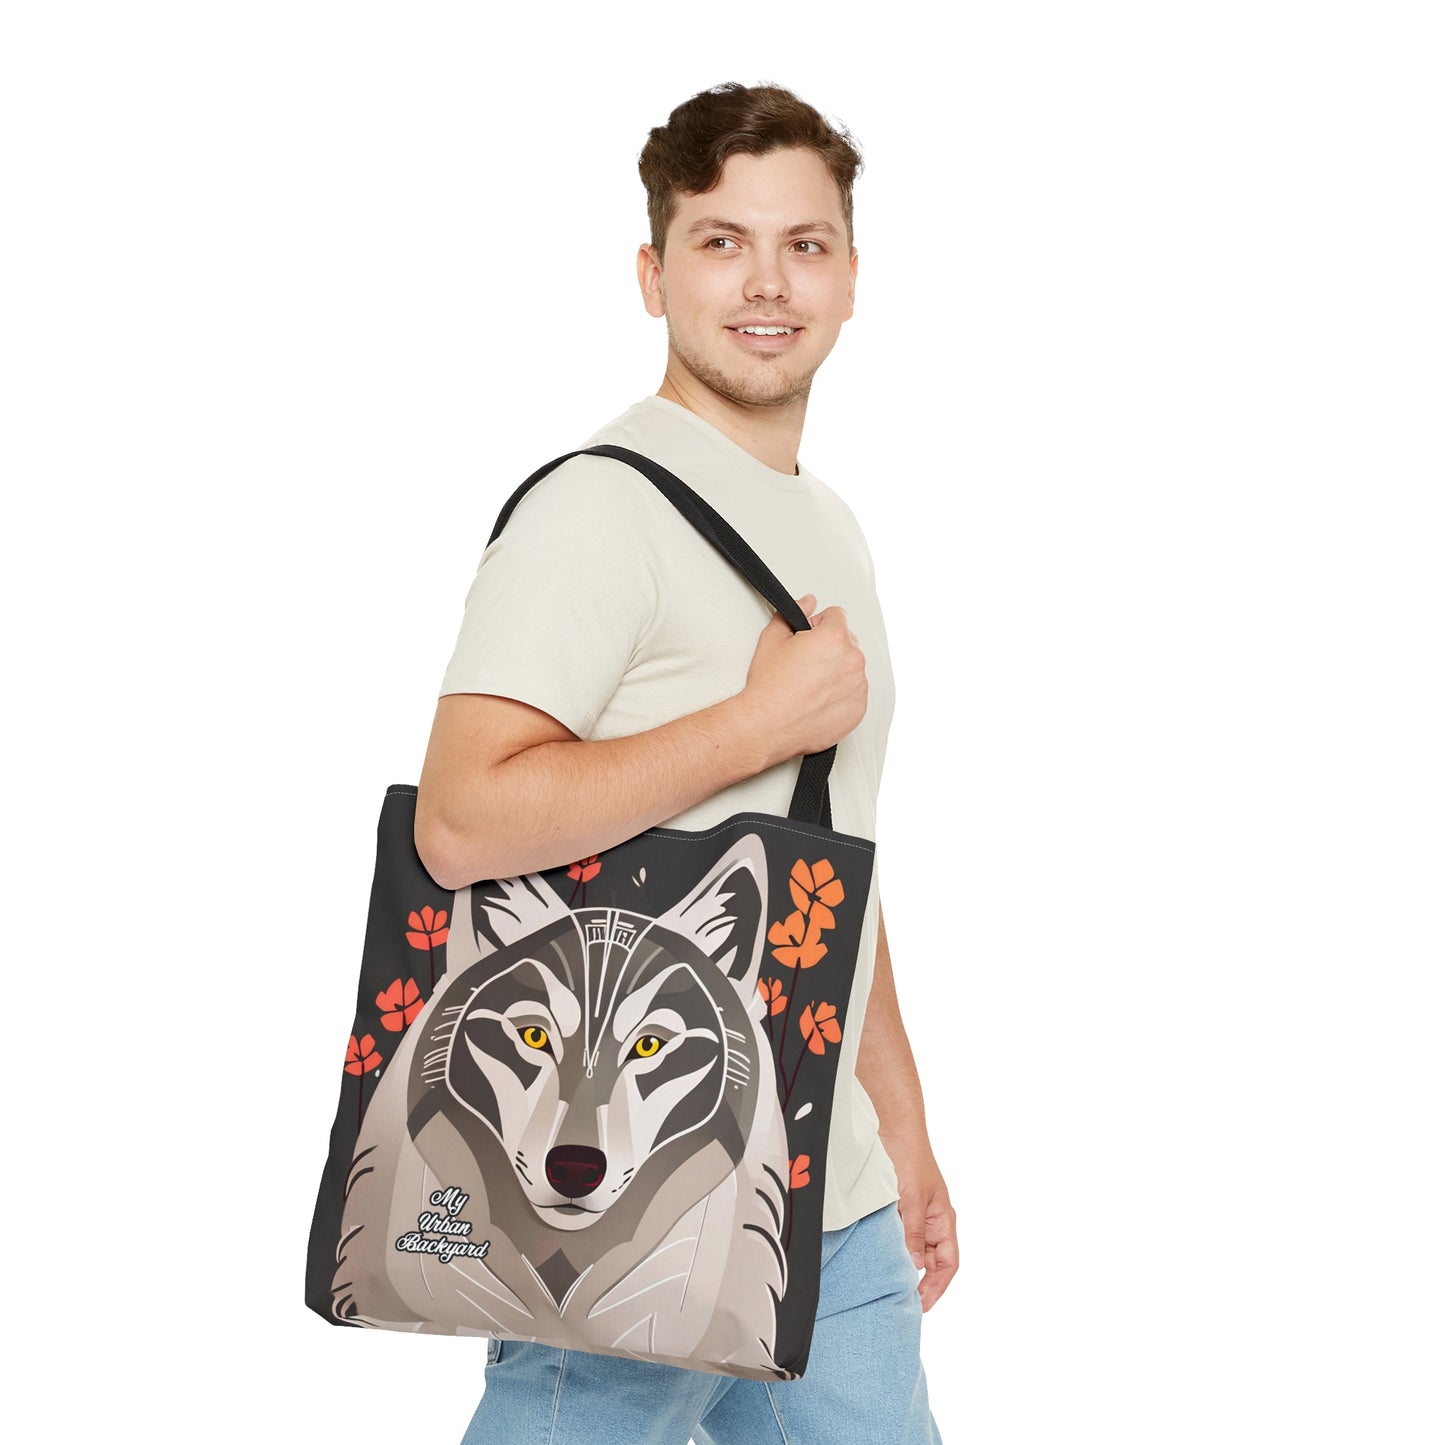 Art Deco Wolf, Tote Bag for Everyday Use - Durable and Functional